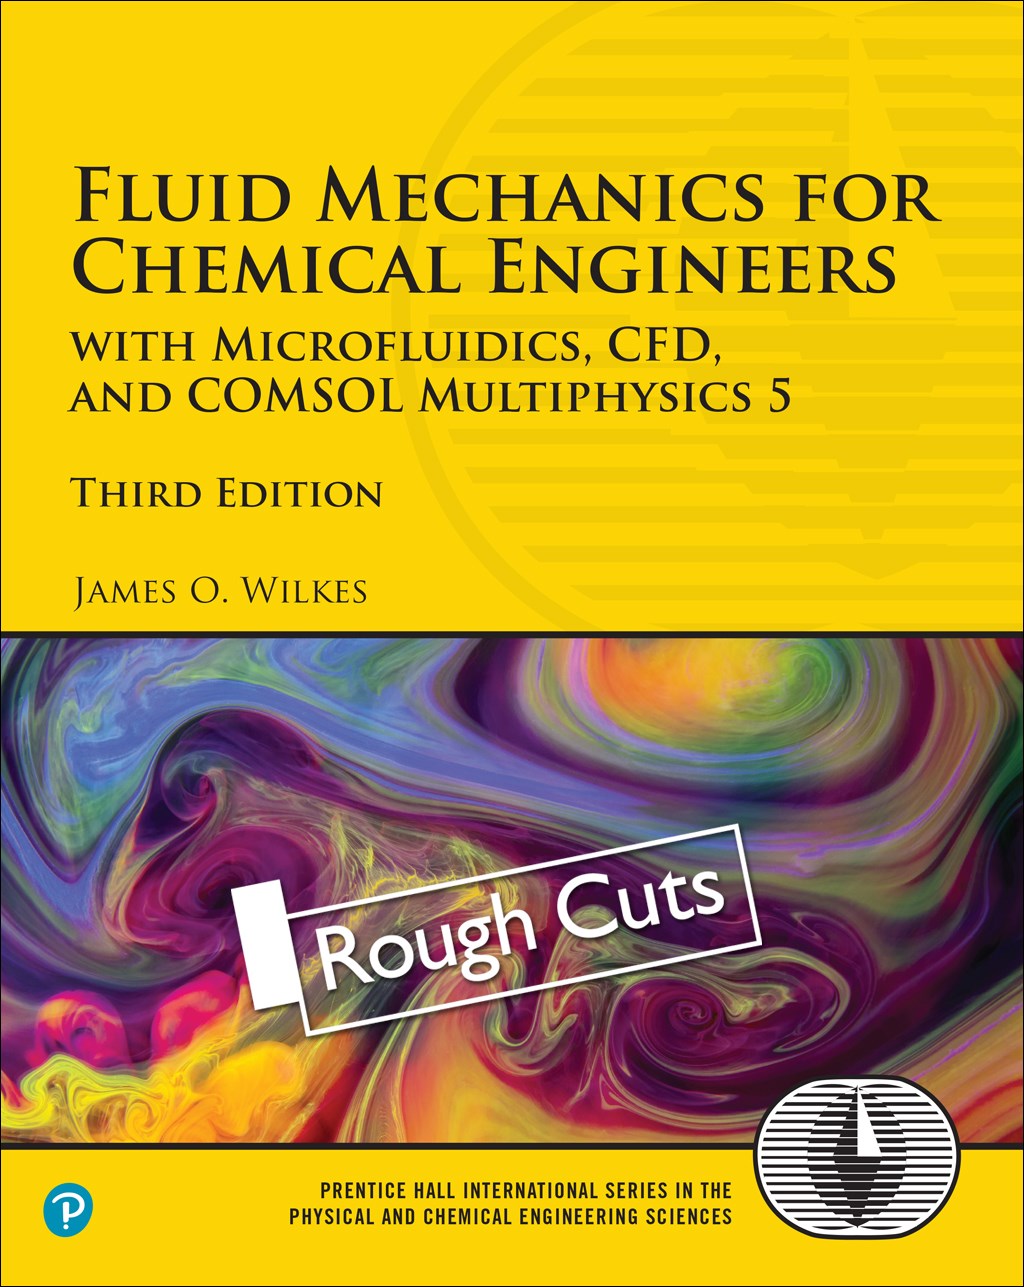 Fluid Mechanics for Chemical Engineers,Rough Cuts: with Microfluidics, CFD, and COMSOL Multiphysics 5, 3rd Edition